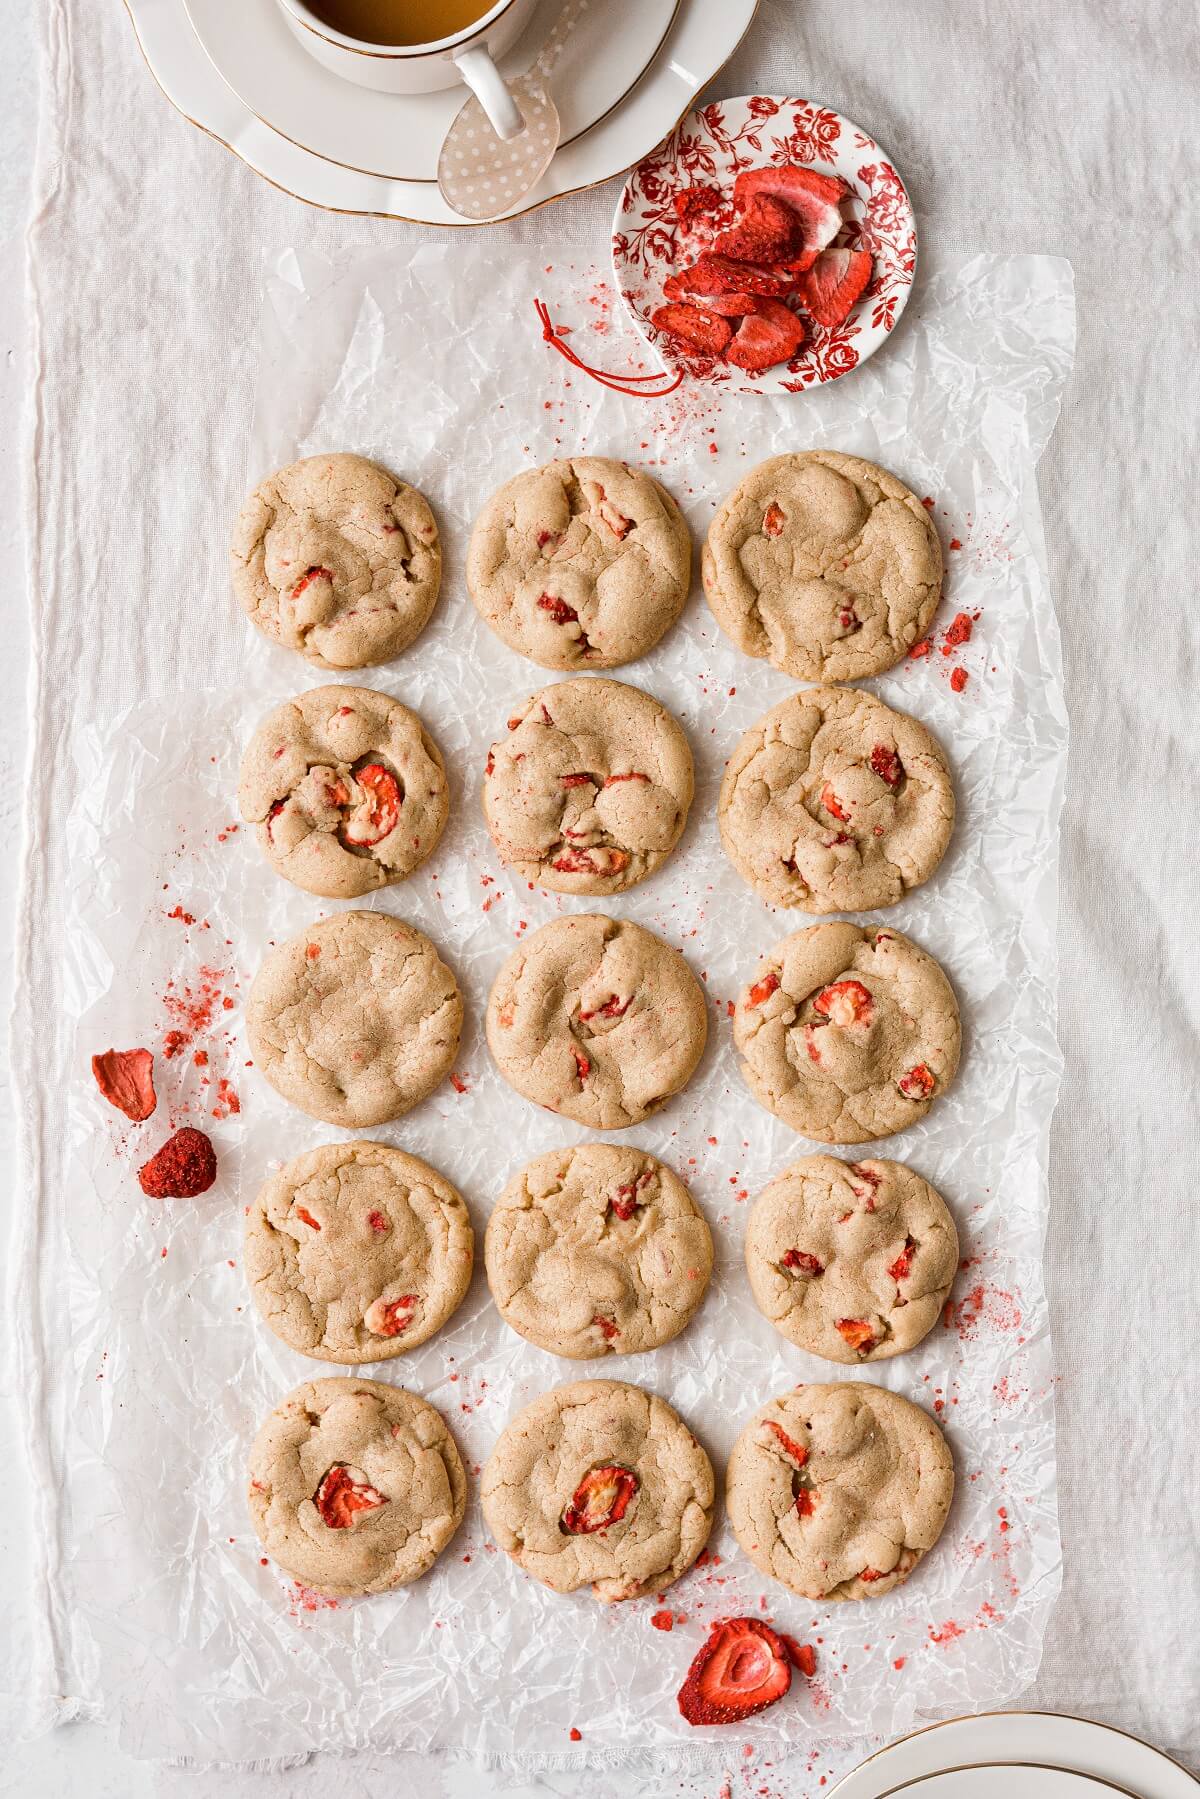 Strawberry brown butter cookies arranged on white linen.